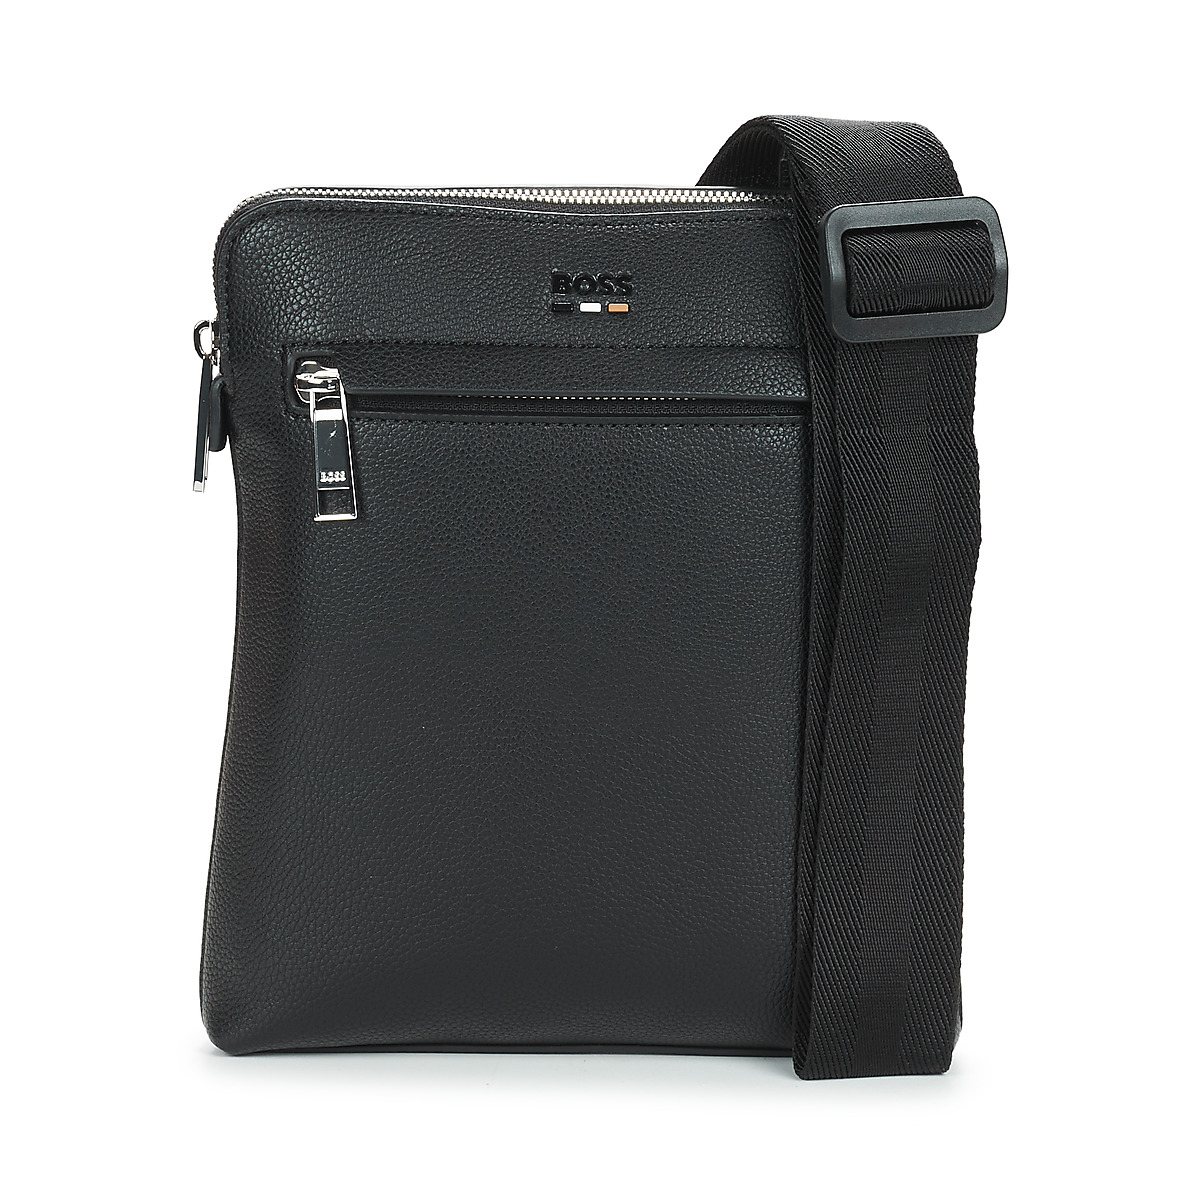 BOSS Ray_S Black 109,00 ! env | - / € zip Clutches delivery Pouches Europe Men - Spartoo Bags Fast